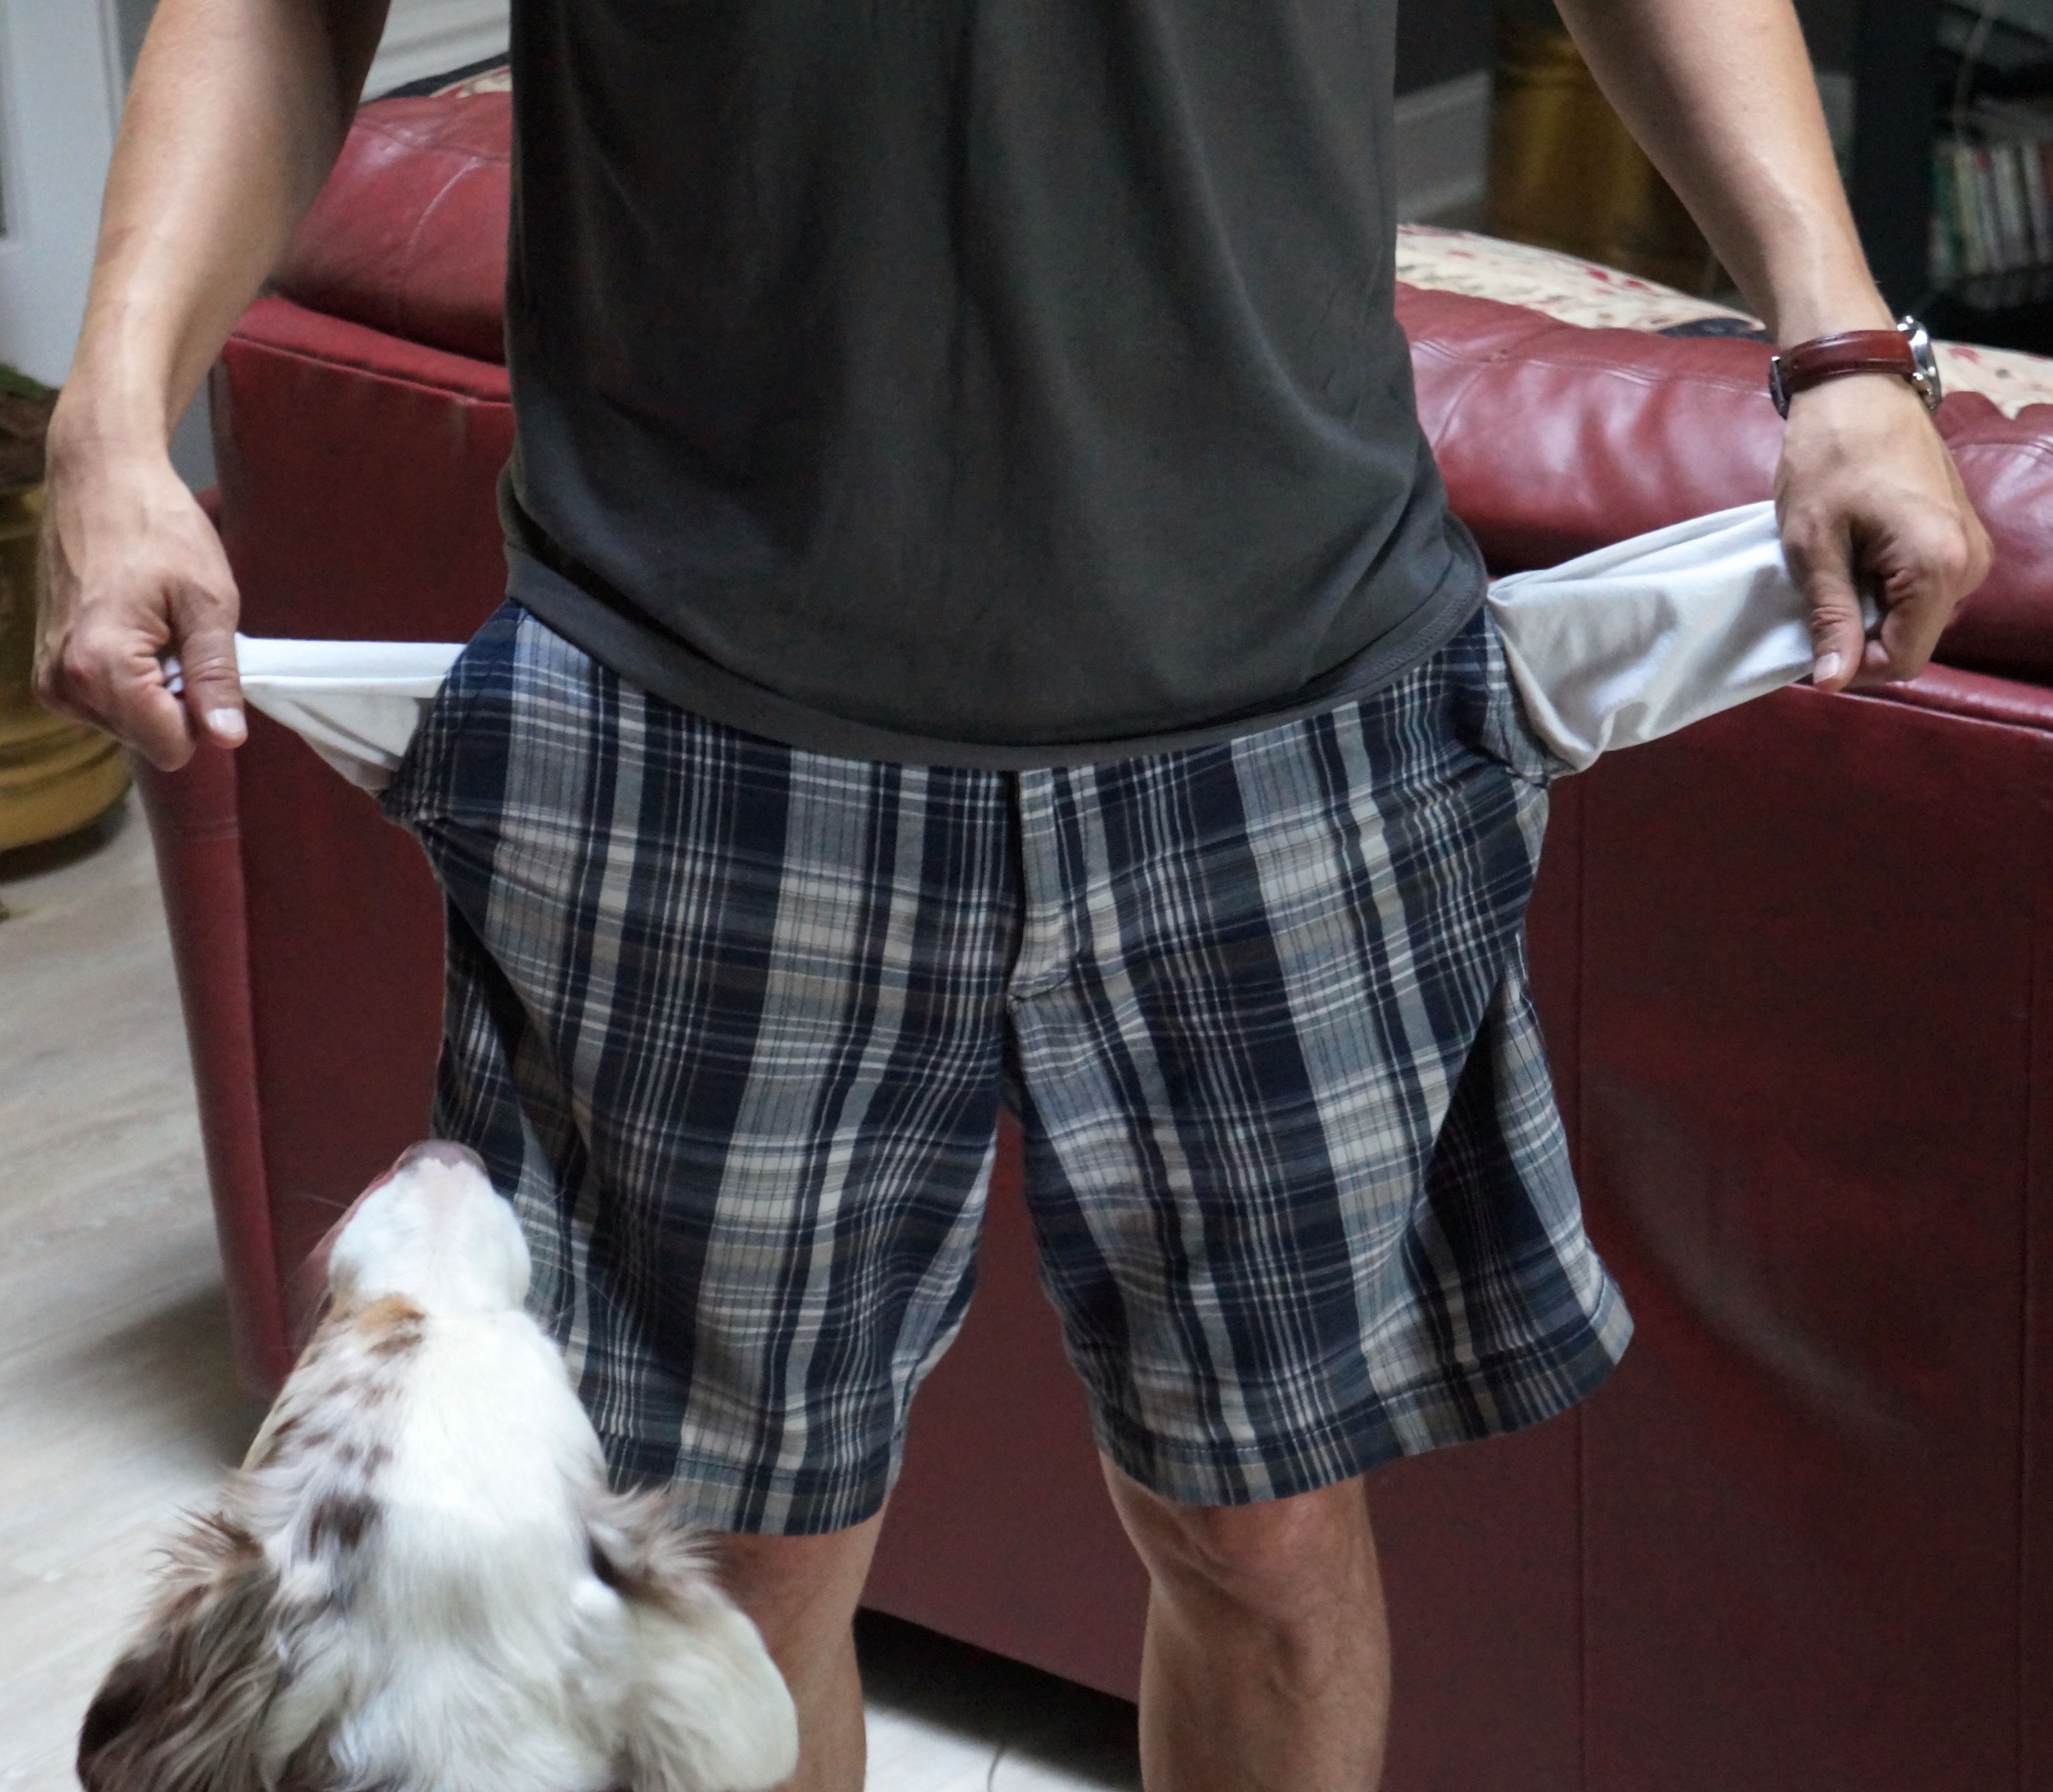 Student holding empty pockets while dog looks on